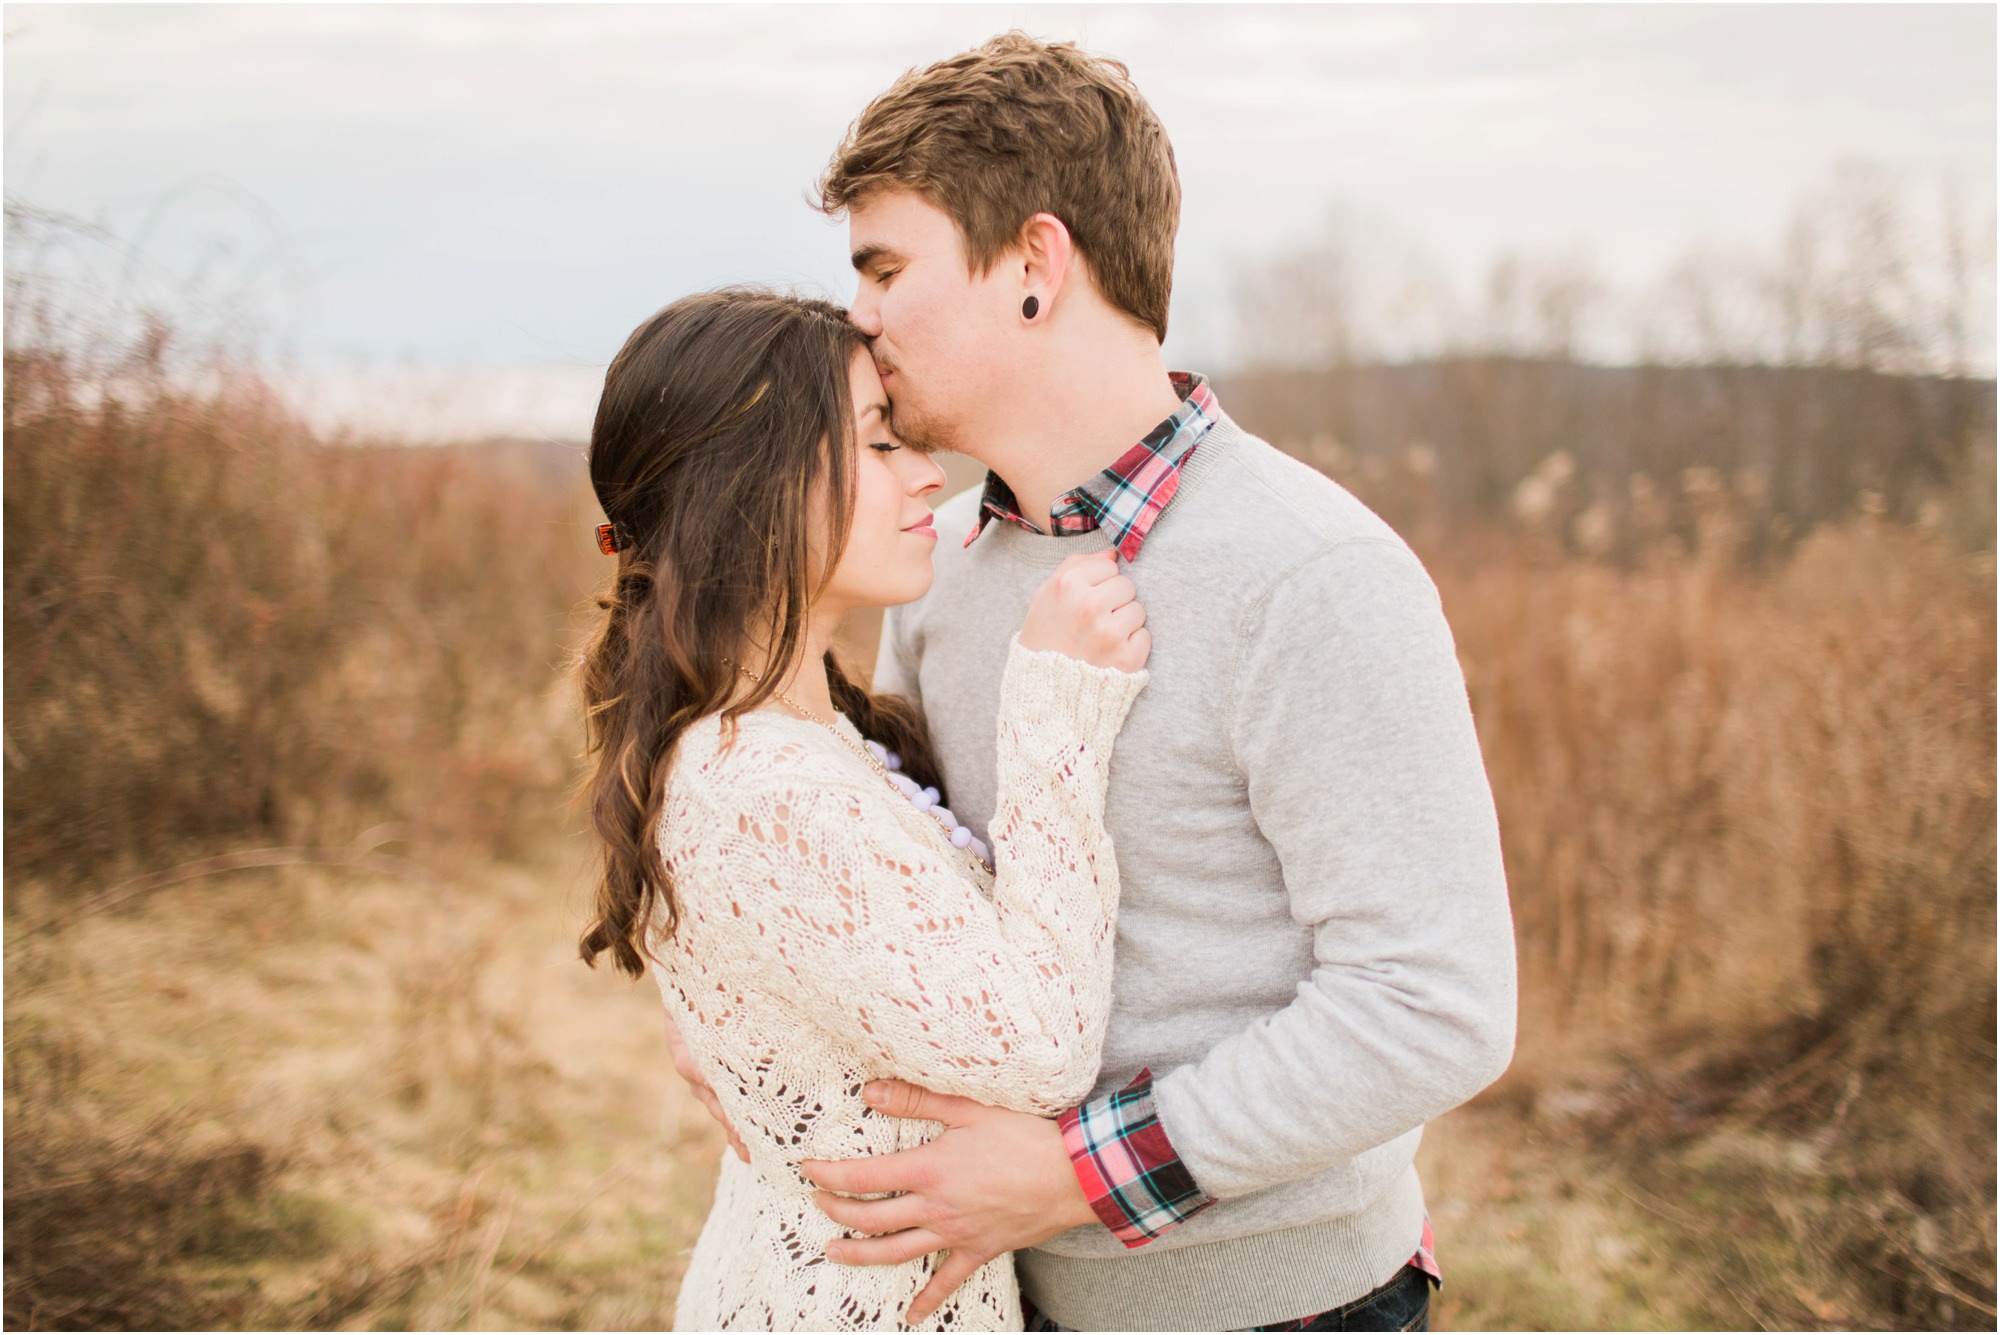 Couple in a field after pillow fight engagement session